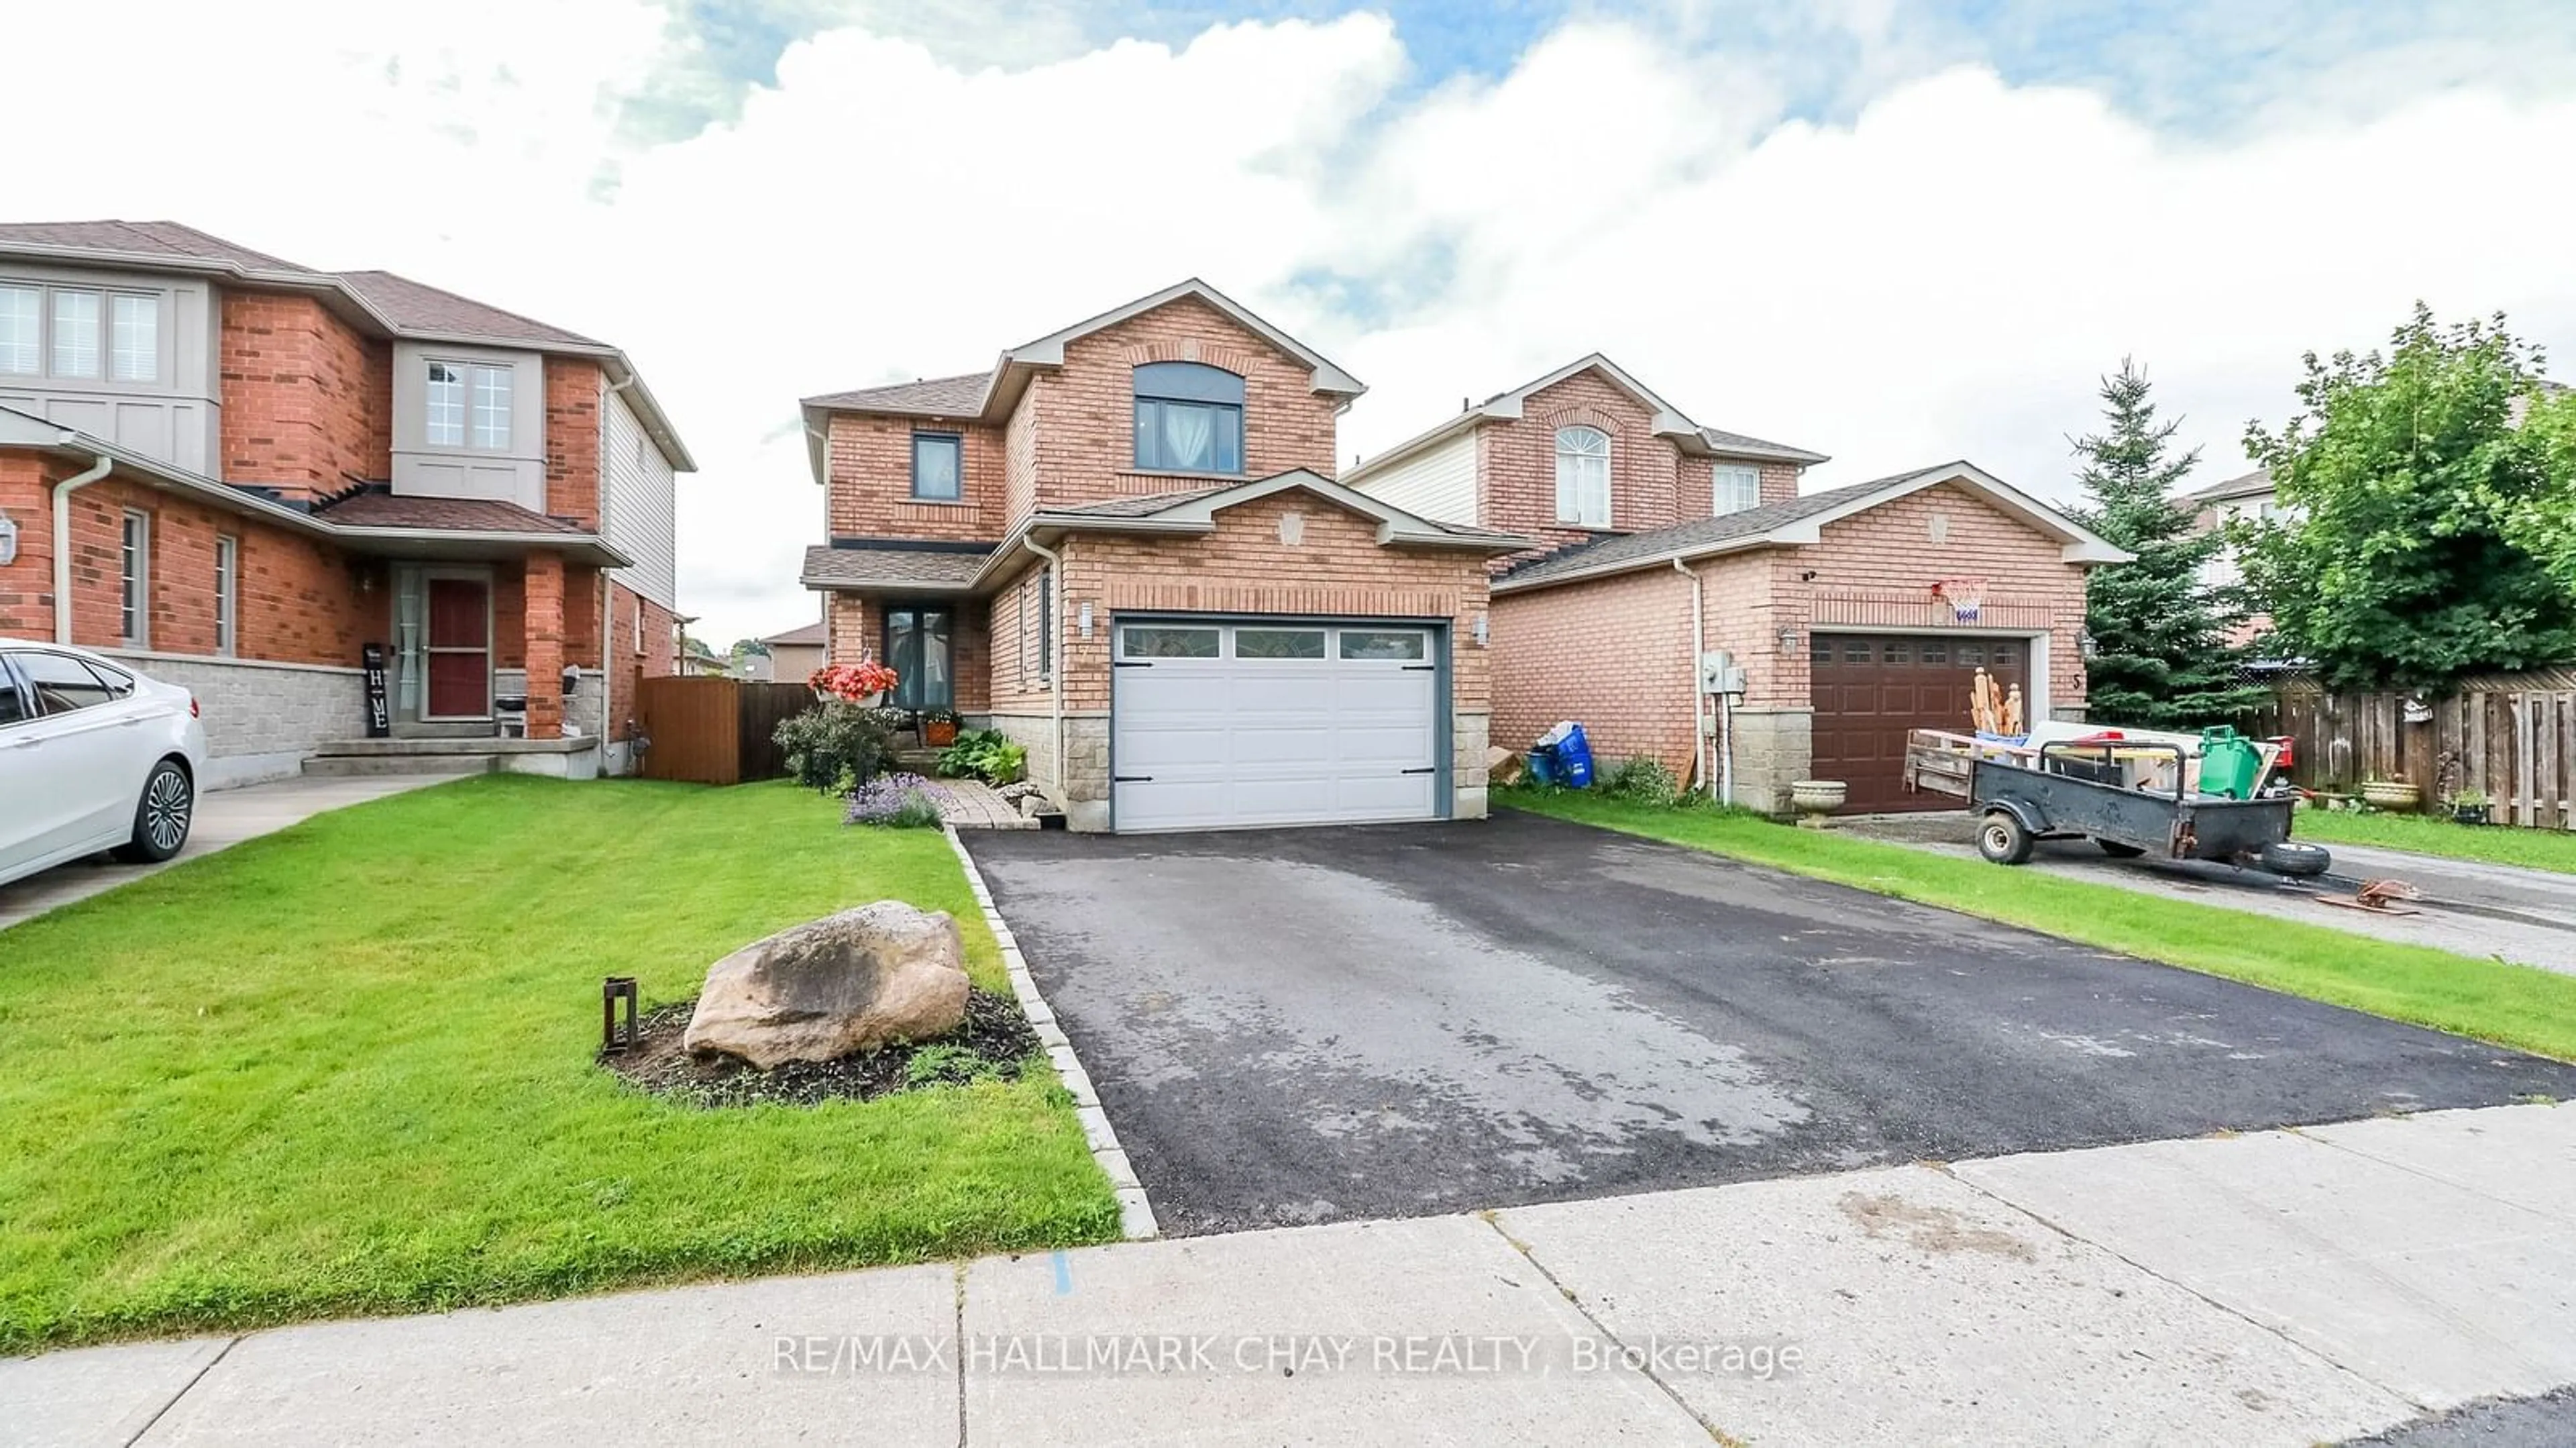 Home with brick exterior material for 7 Hemlock Crt, Barrie Ontario L4N 9N5